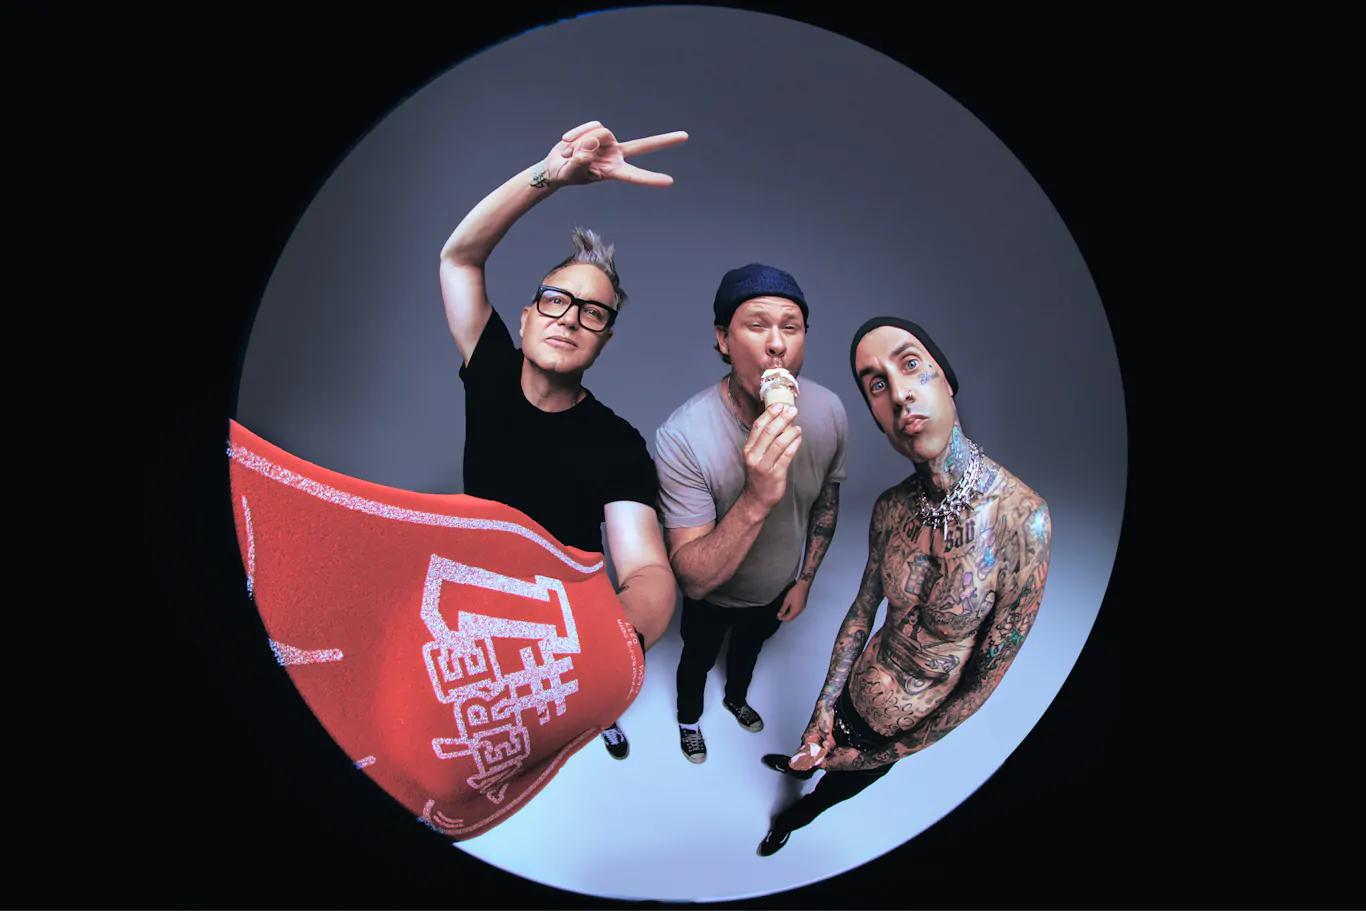 BLINK-182 announce headline show at The SSE Arena, Belfast on 4th September 2023